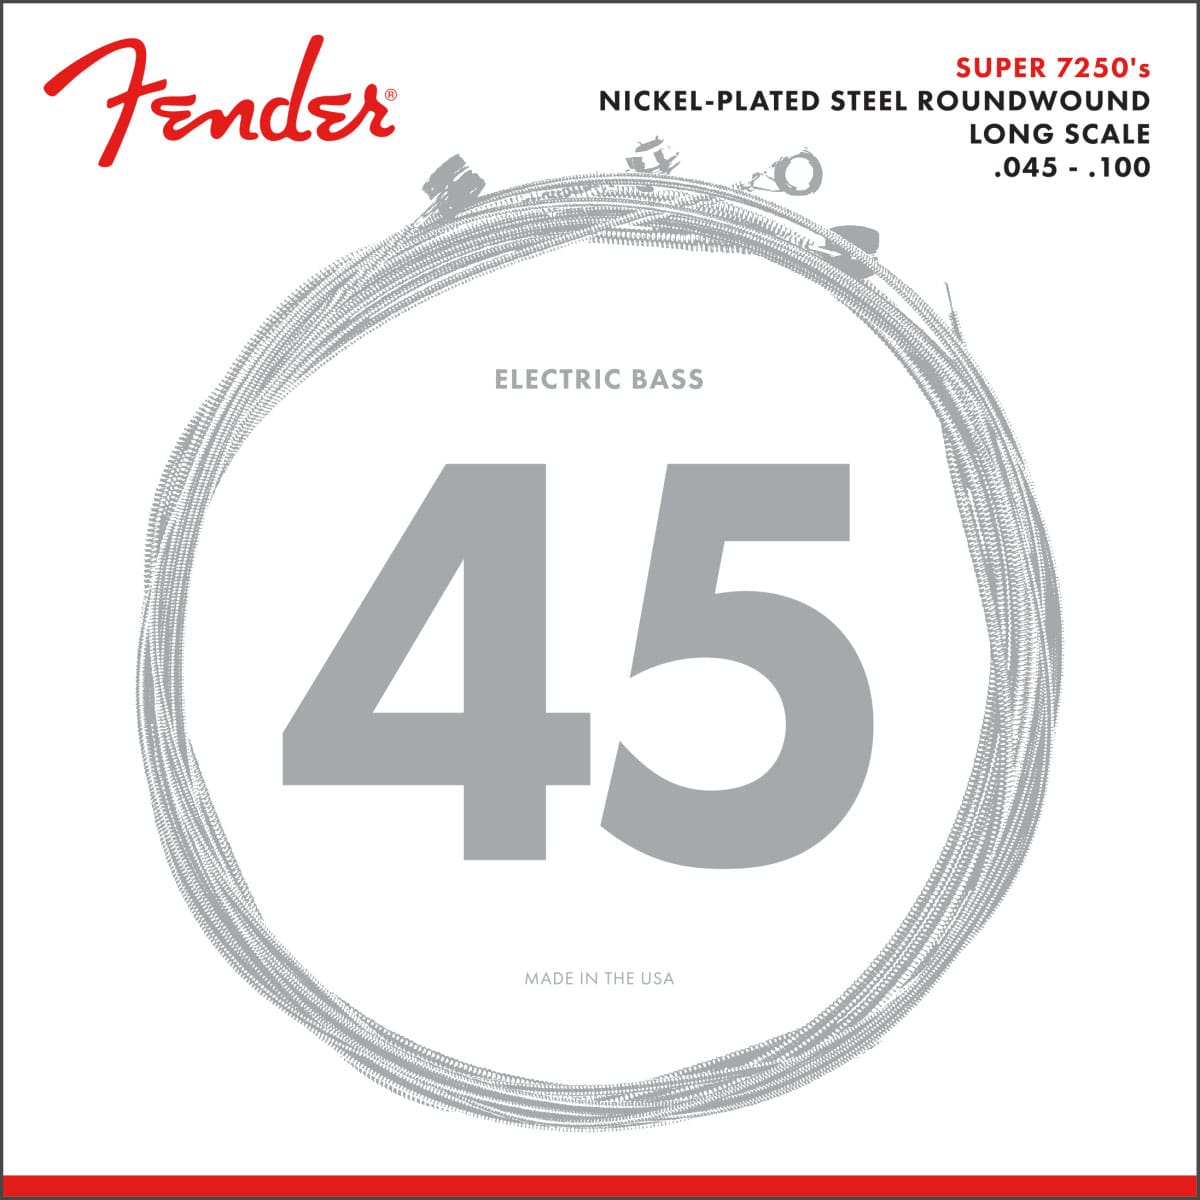 FENDER SUPER 7250 NICKEL-PLATED STEEL ROUNDWOUND LONG SCALE 45-100